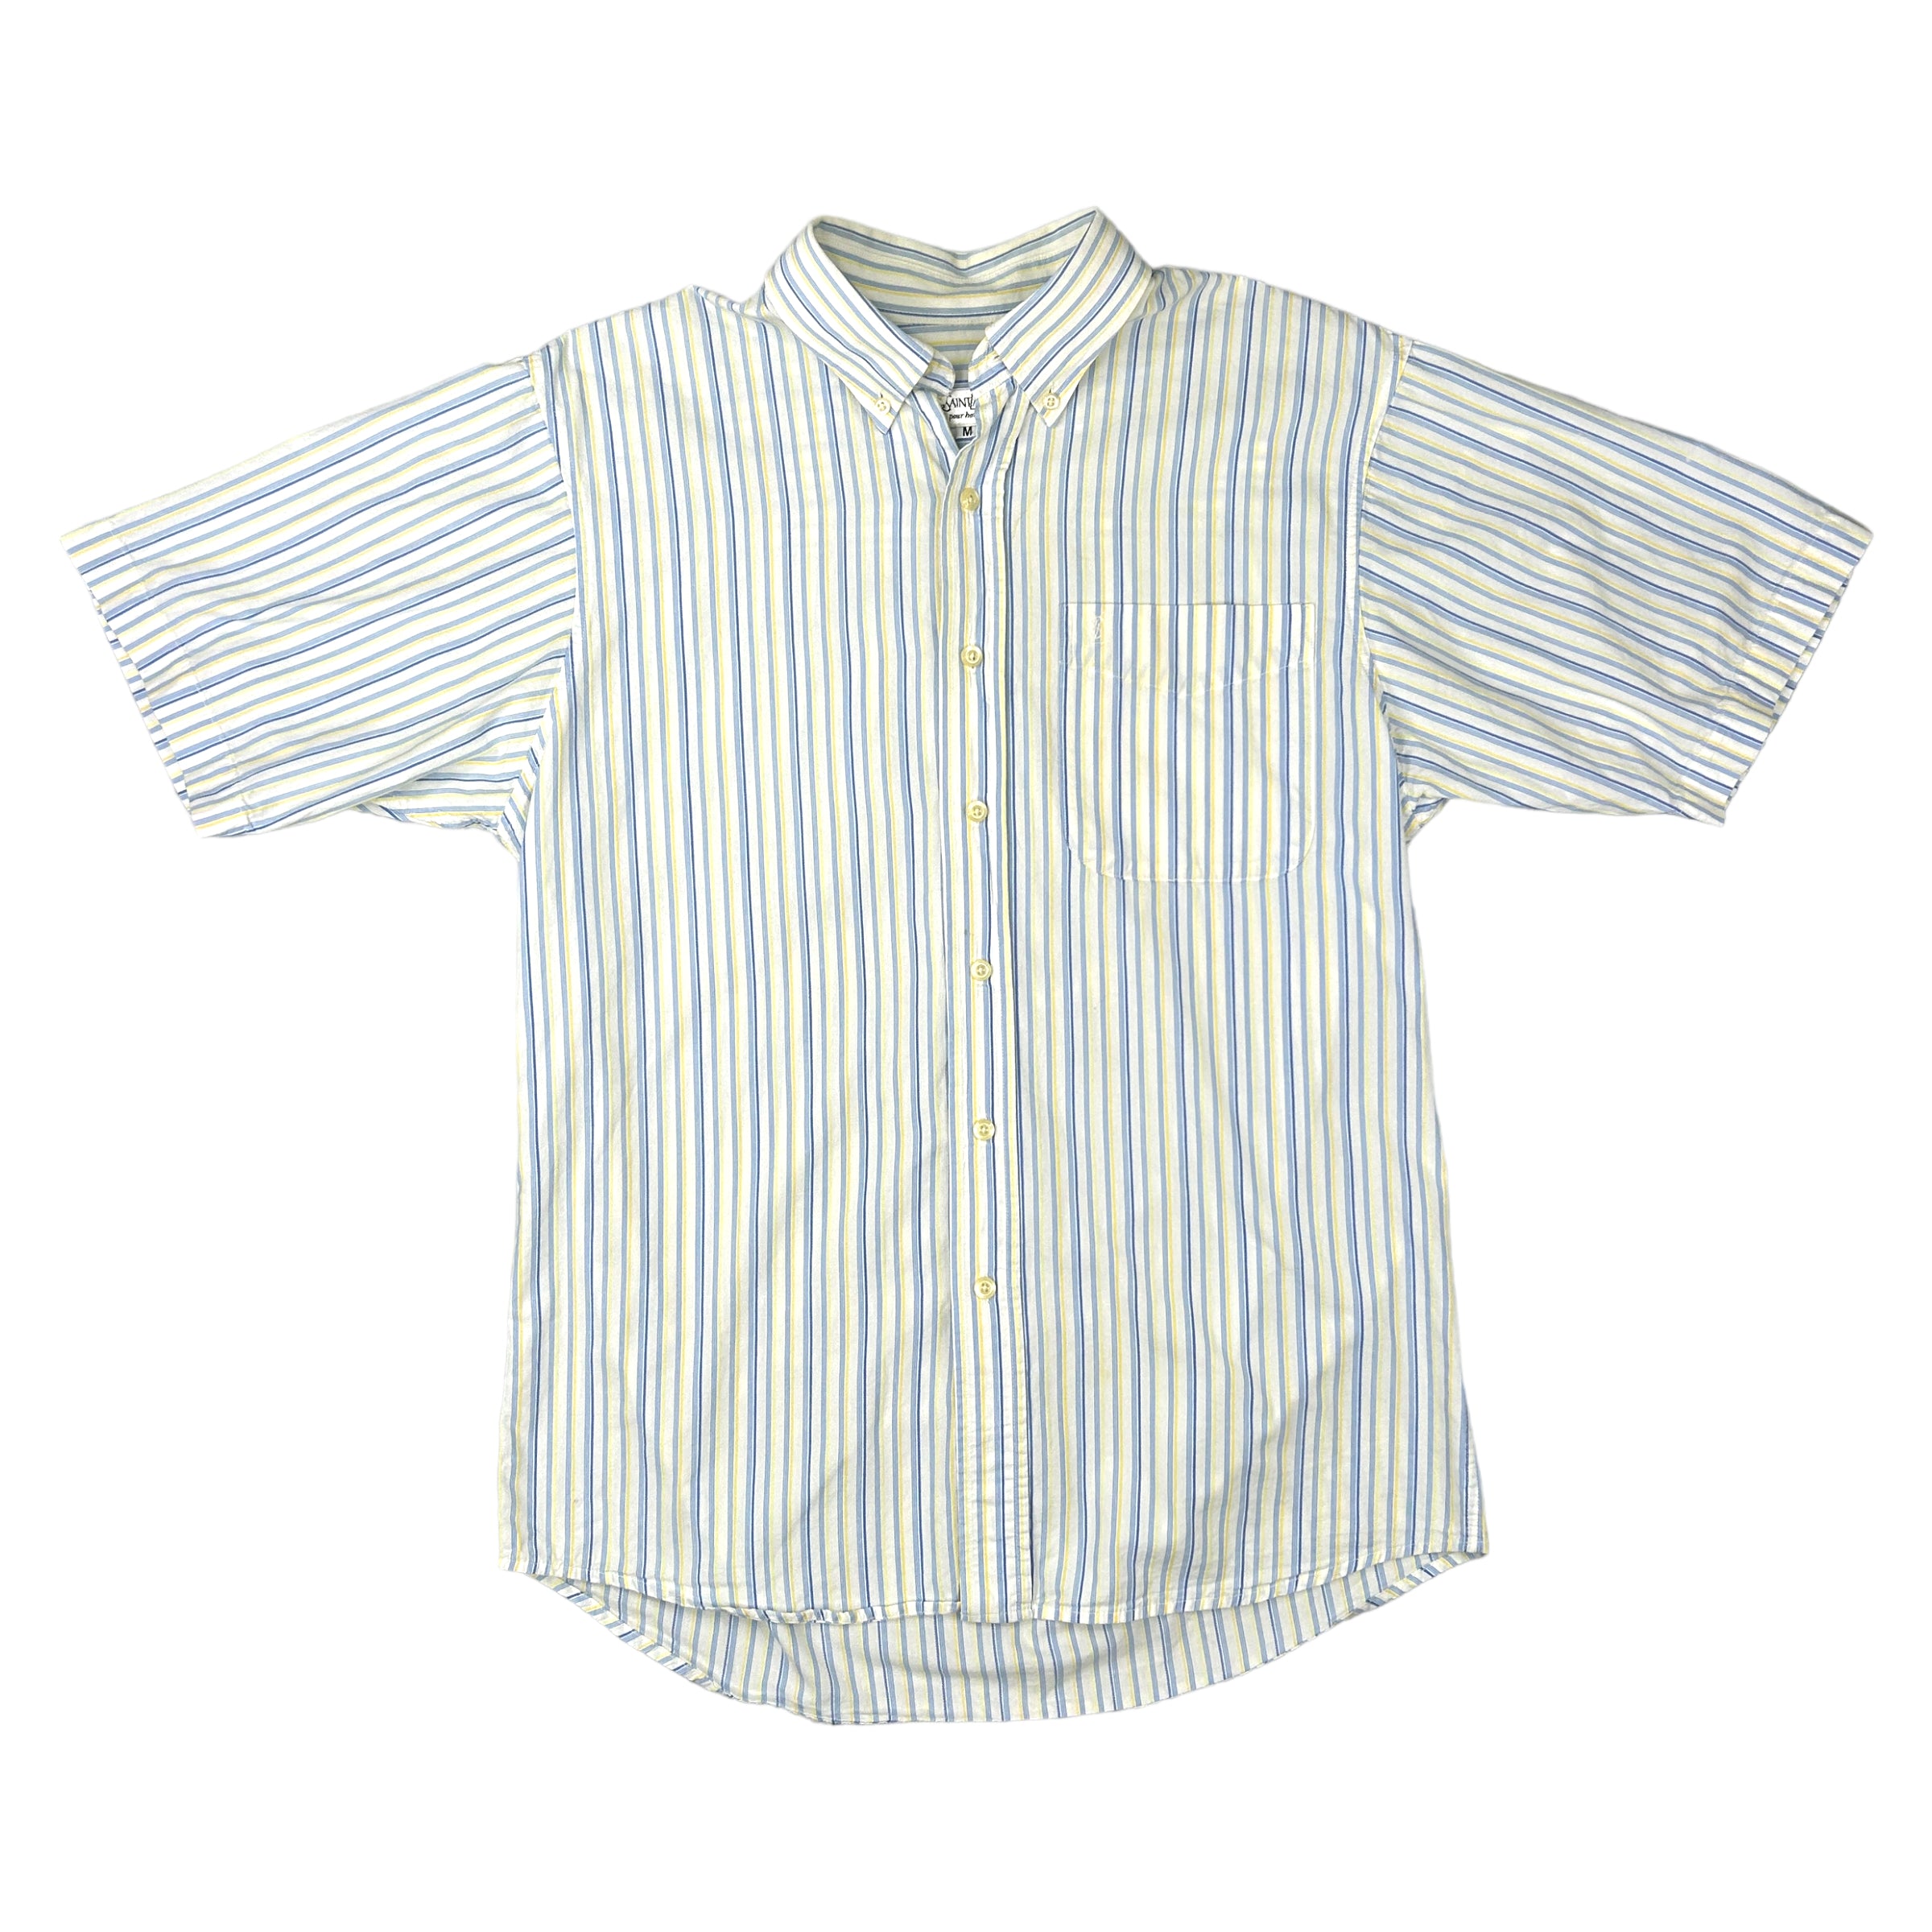 YSL BLUE/YELLOW VERTICAL STRIPED SHORT SLEEVE BUTTON UP